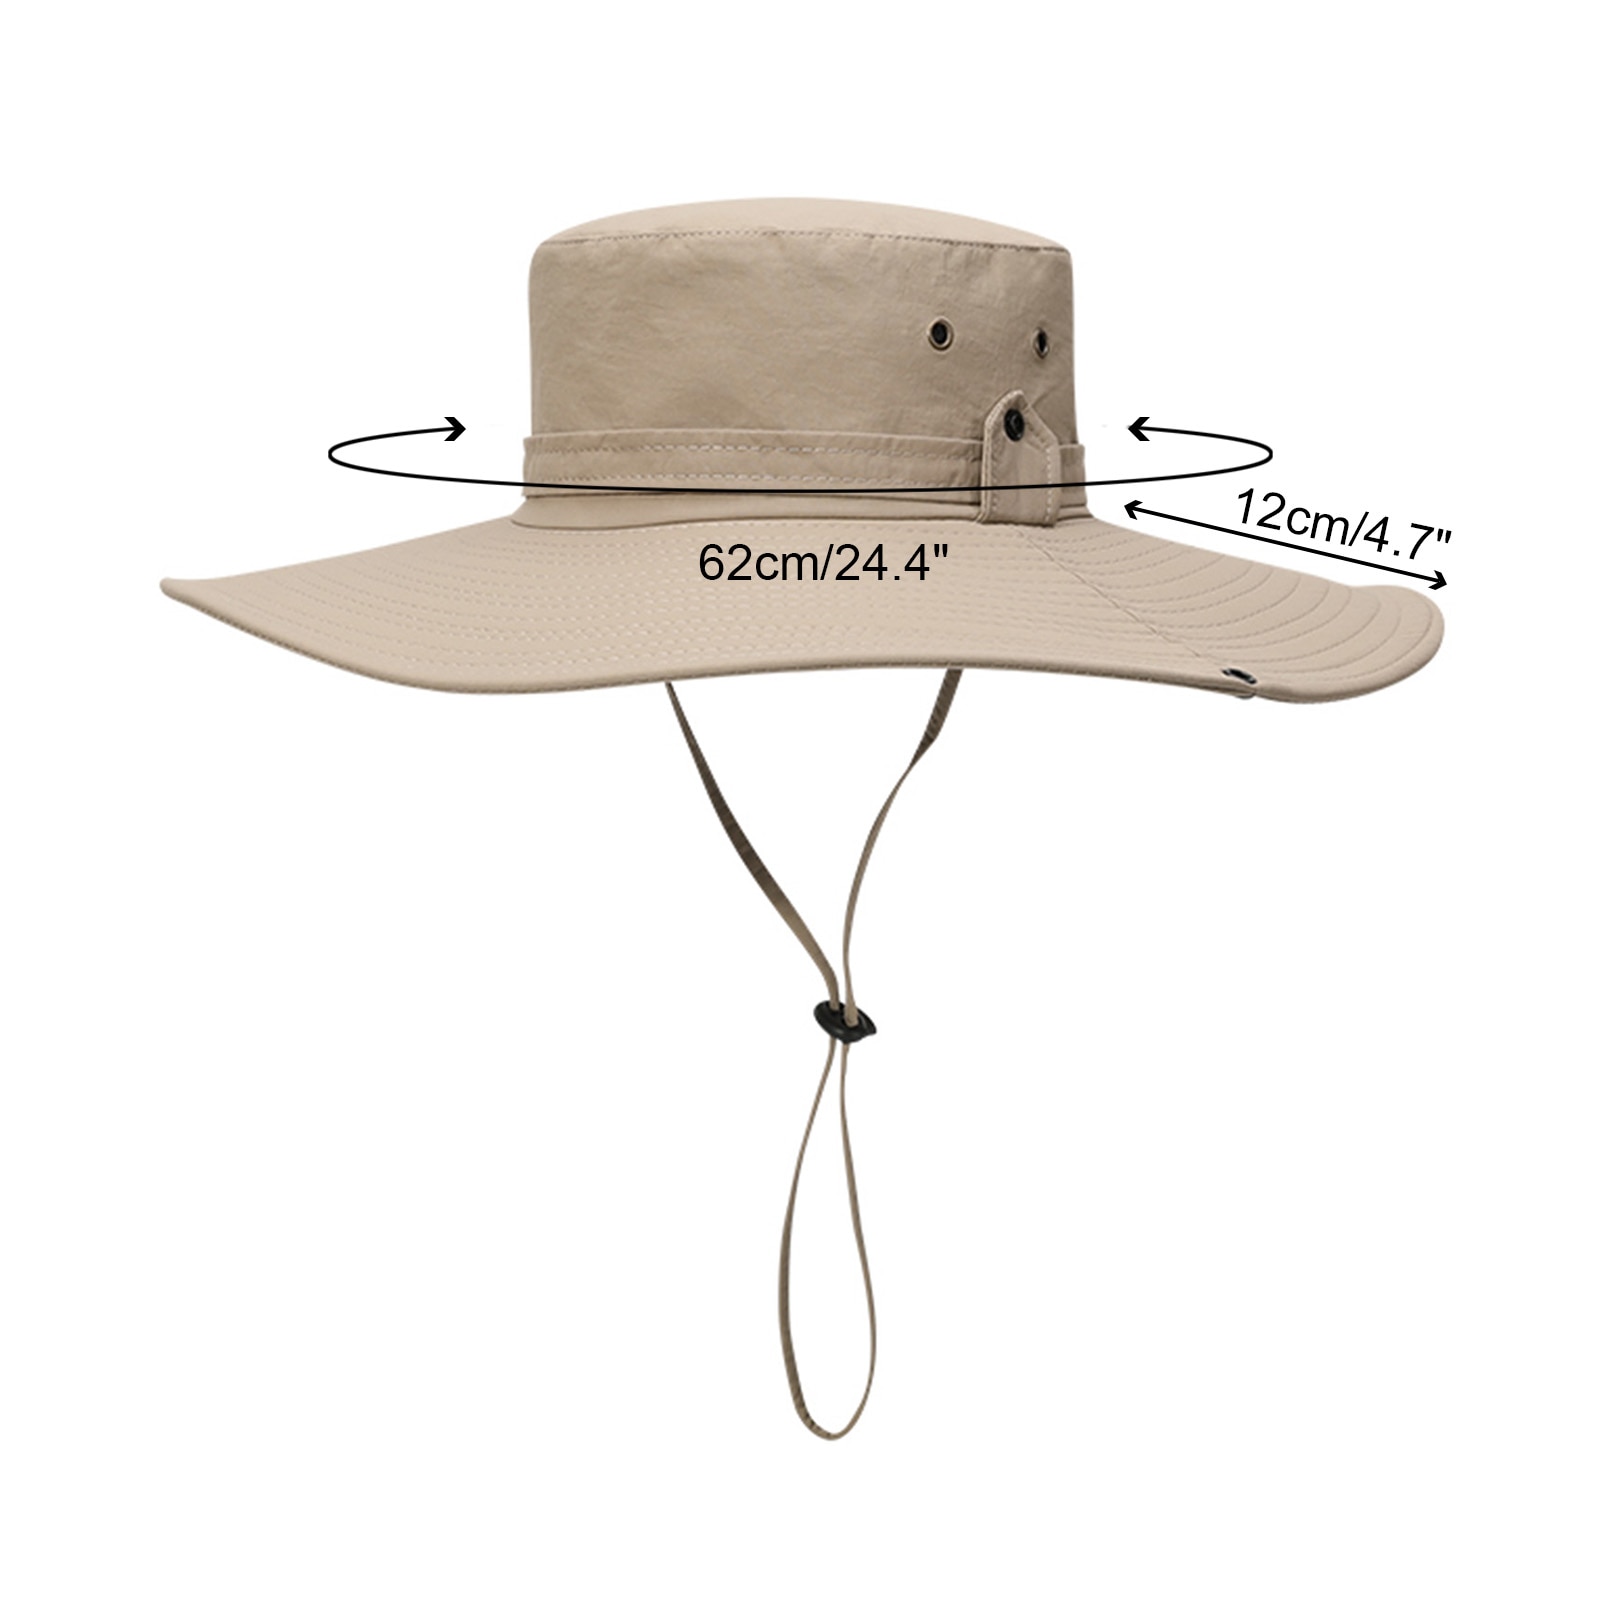 Wide Brim Fisherman Hat With Uv Protection, Unisex Design For